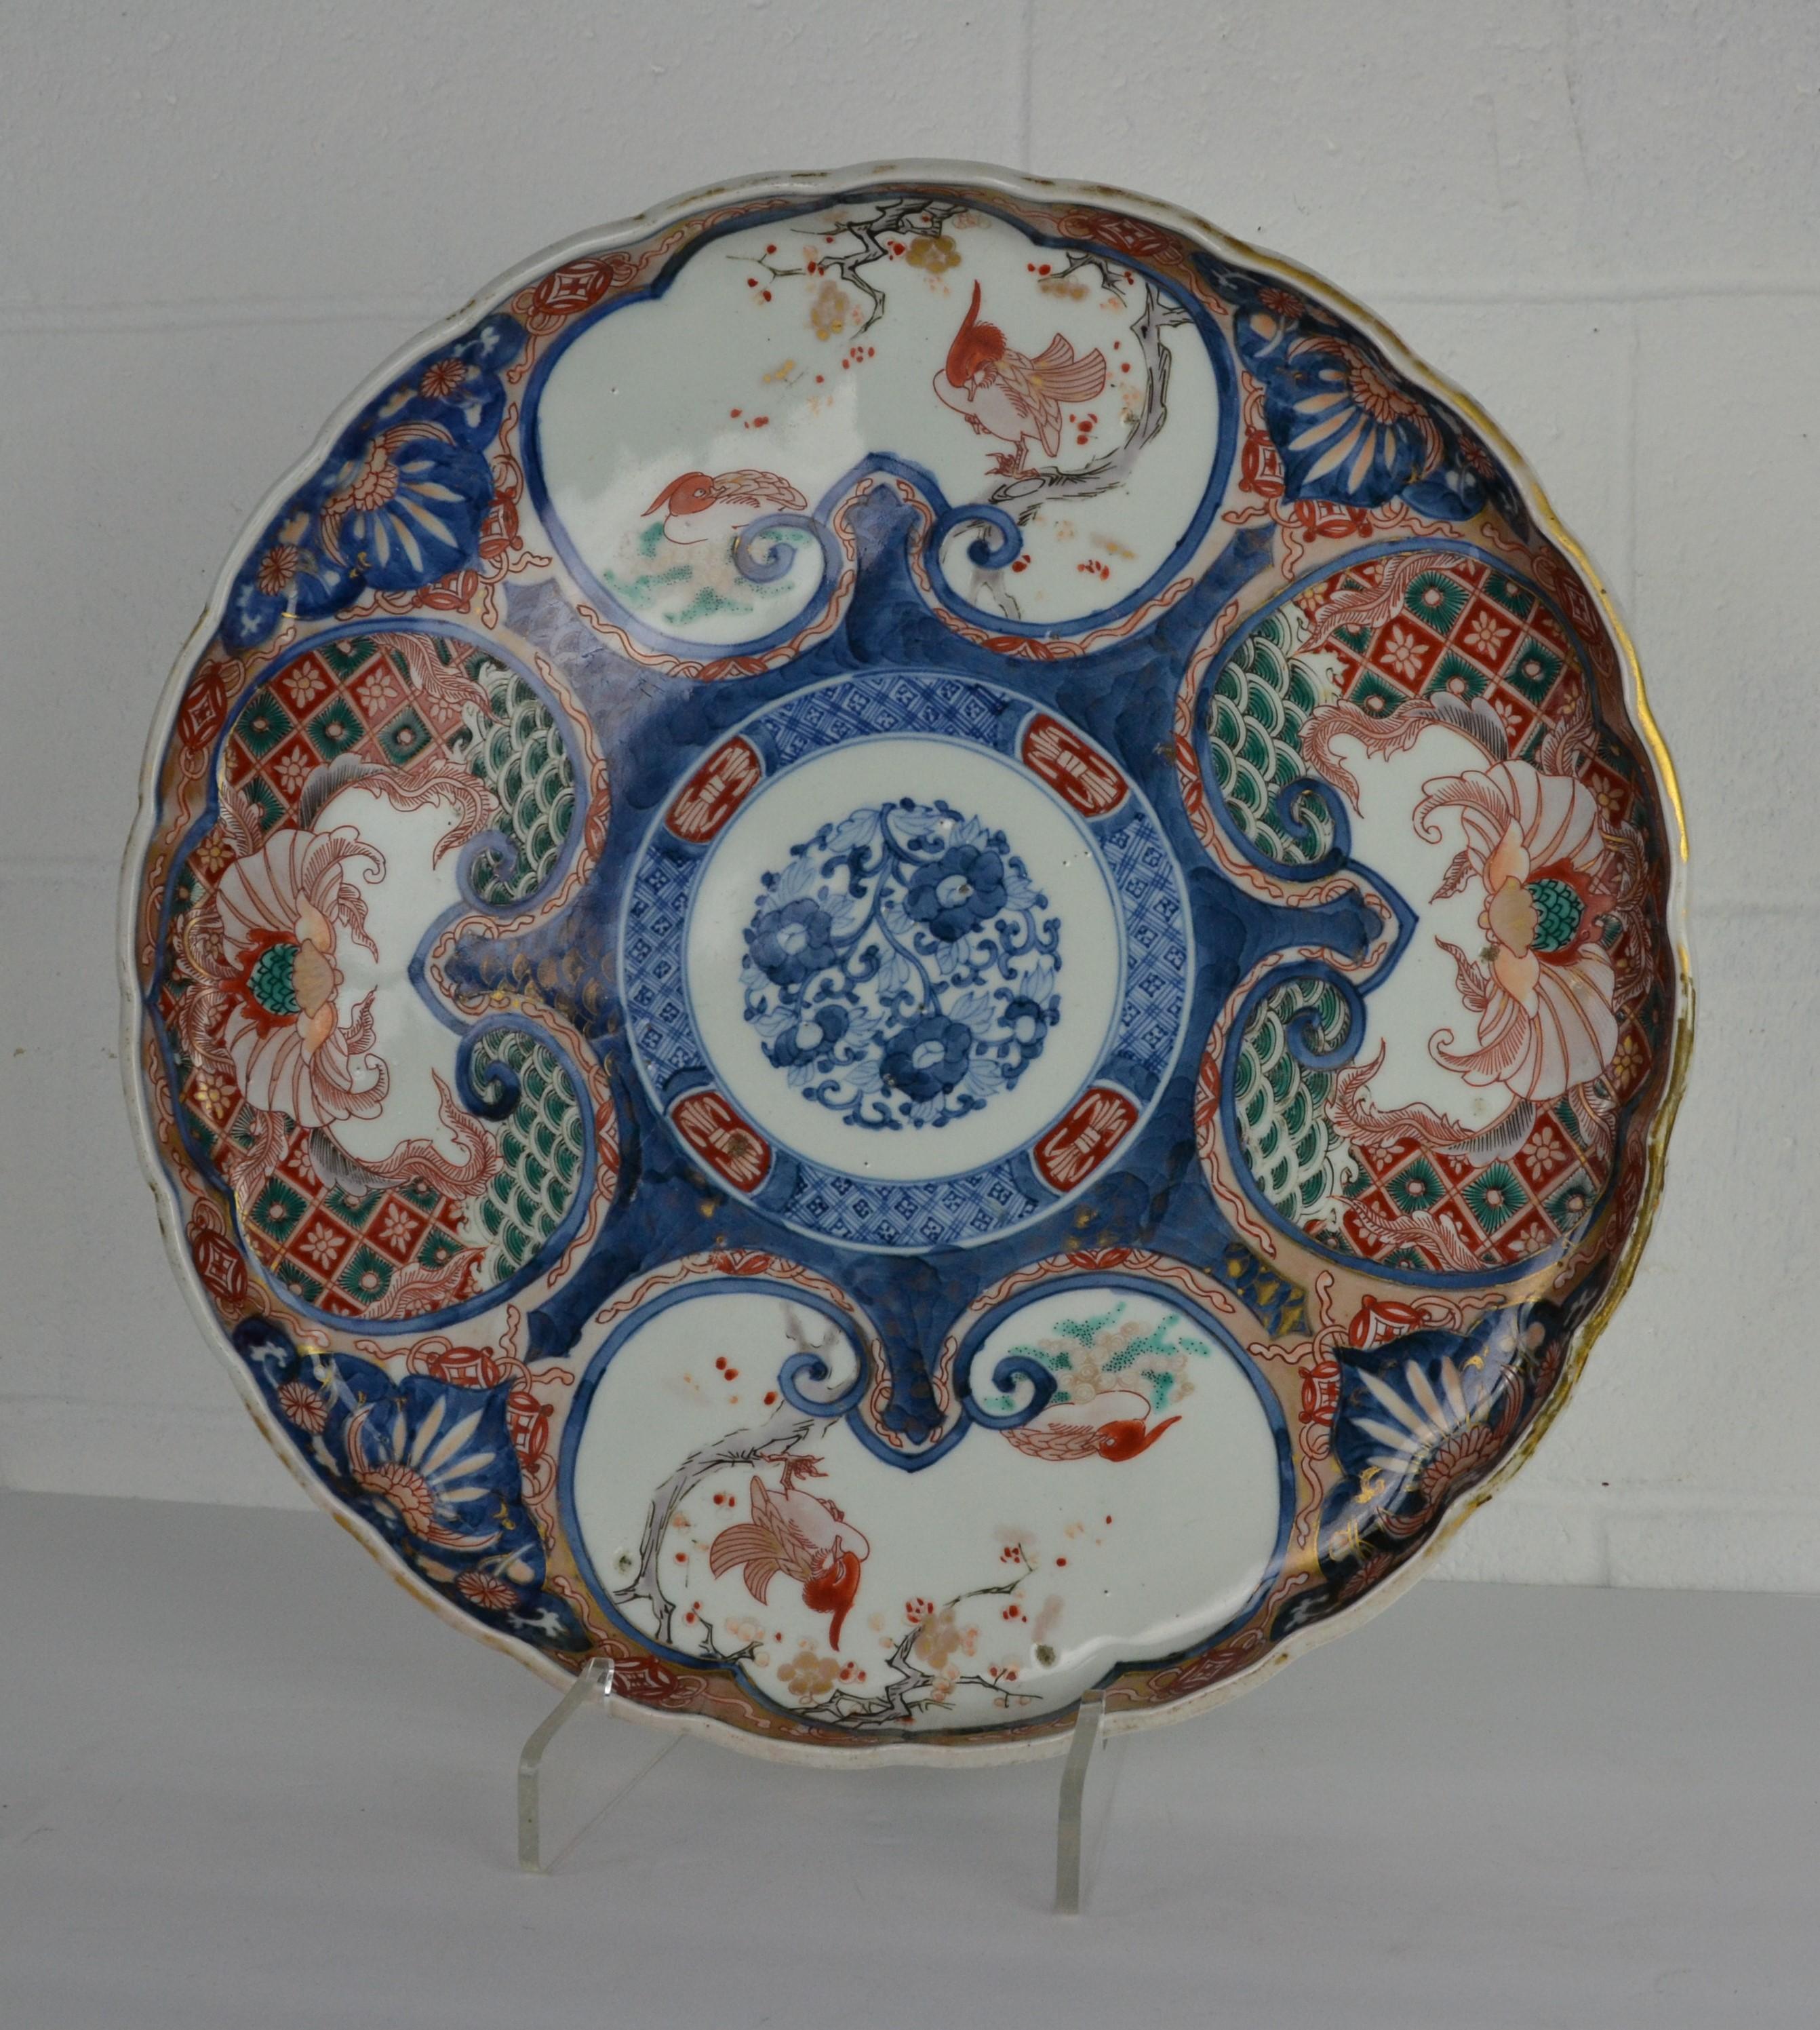 A large Japanese 4 color platter. Late 19th century with character marks. White ground panels decorated with birds. Vertical 